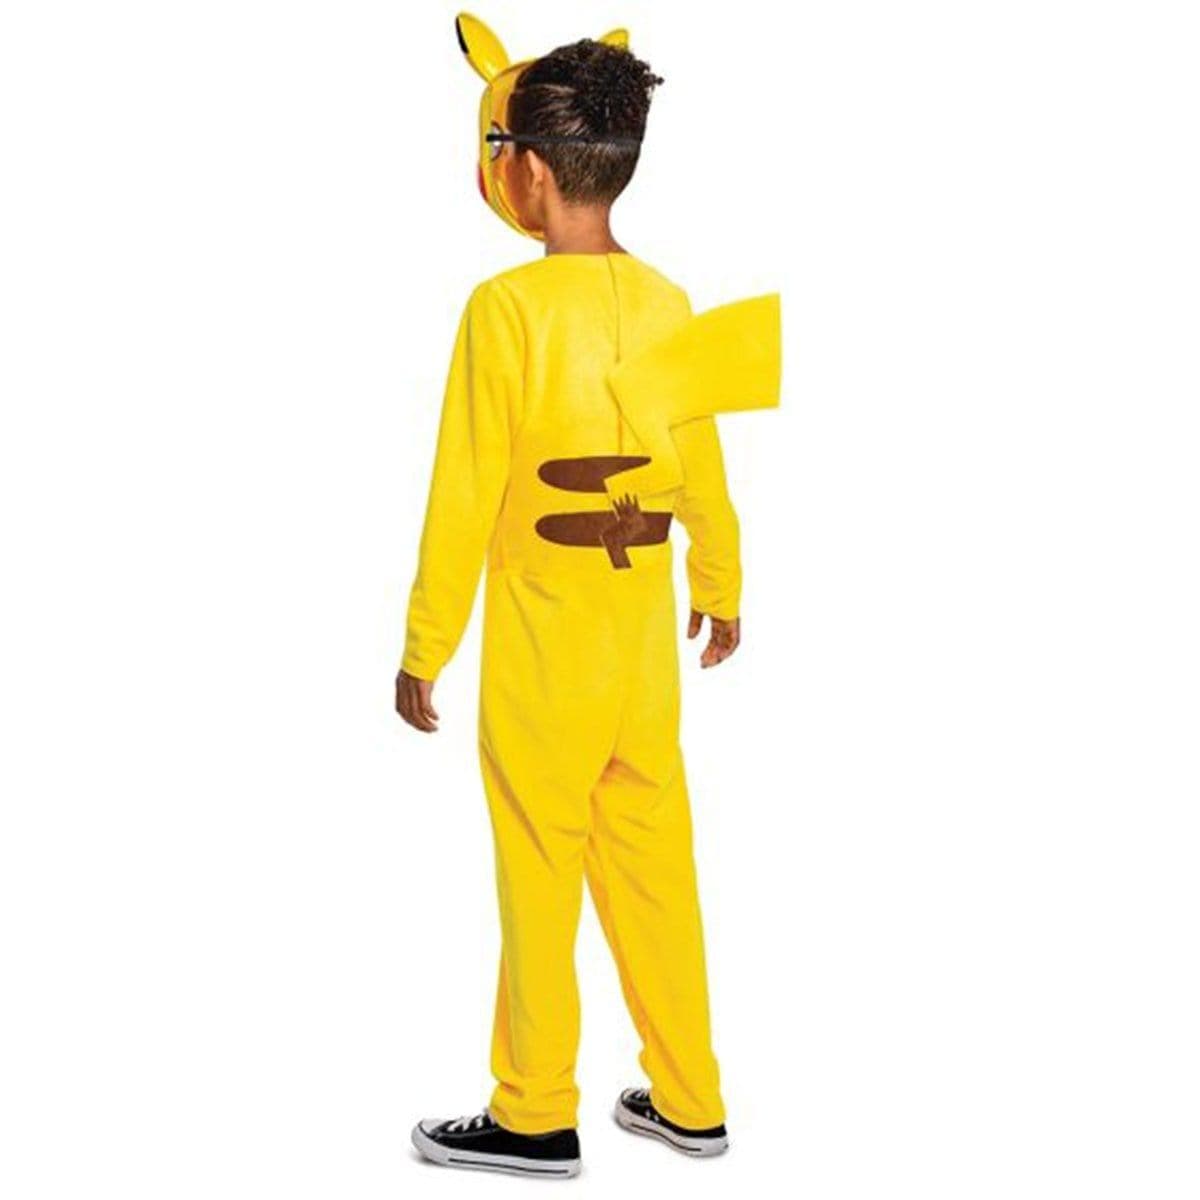 Buy Pokemon - Pikachu Costume - Boy sold at Party Expert